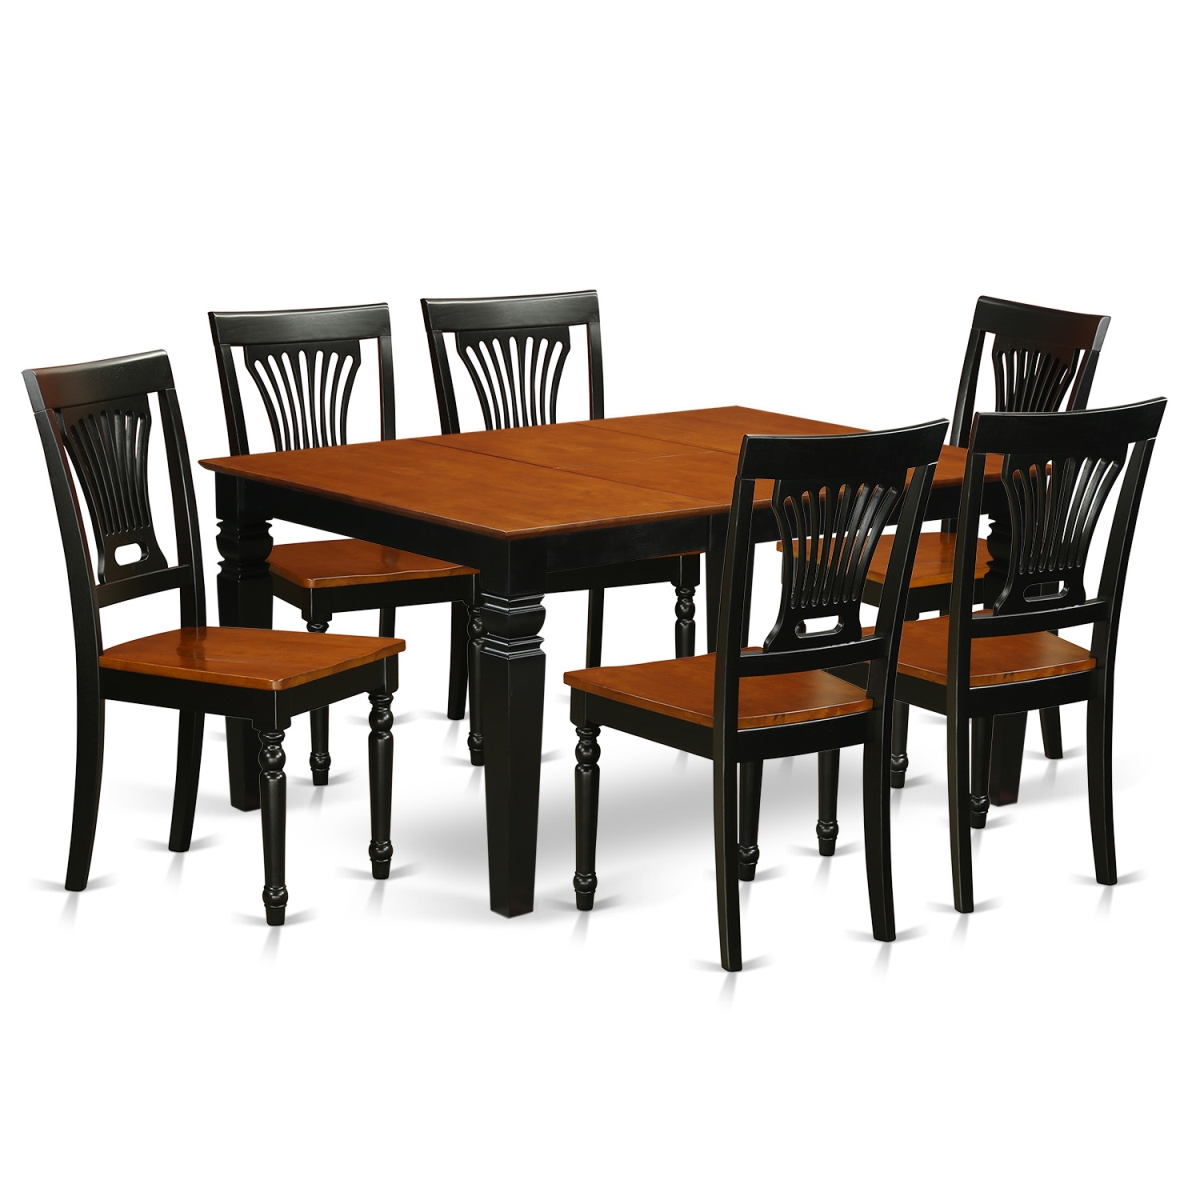 WEPL7-BCH-W Dining Room Set with One Weston Table & Six Wood Kitchen Area Chairs, Elegant Black - 7 Piece -  East West Furniture